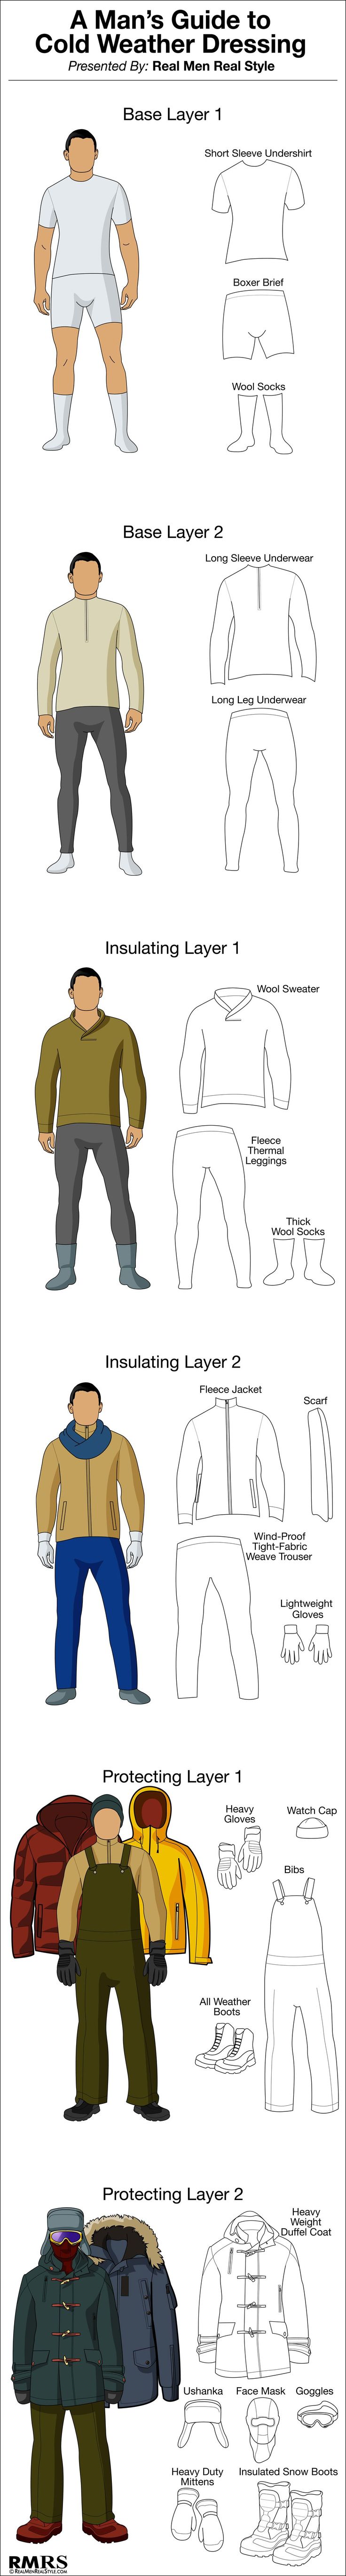 Fashion infographic : Cold Weather Dressing Infographic ...